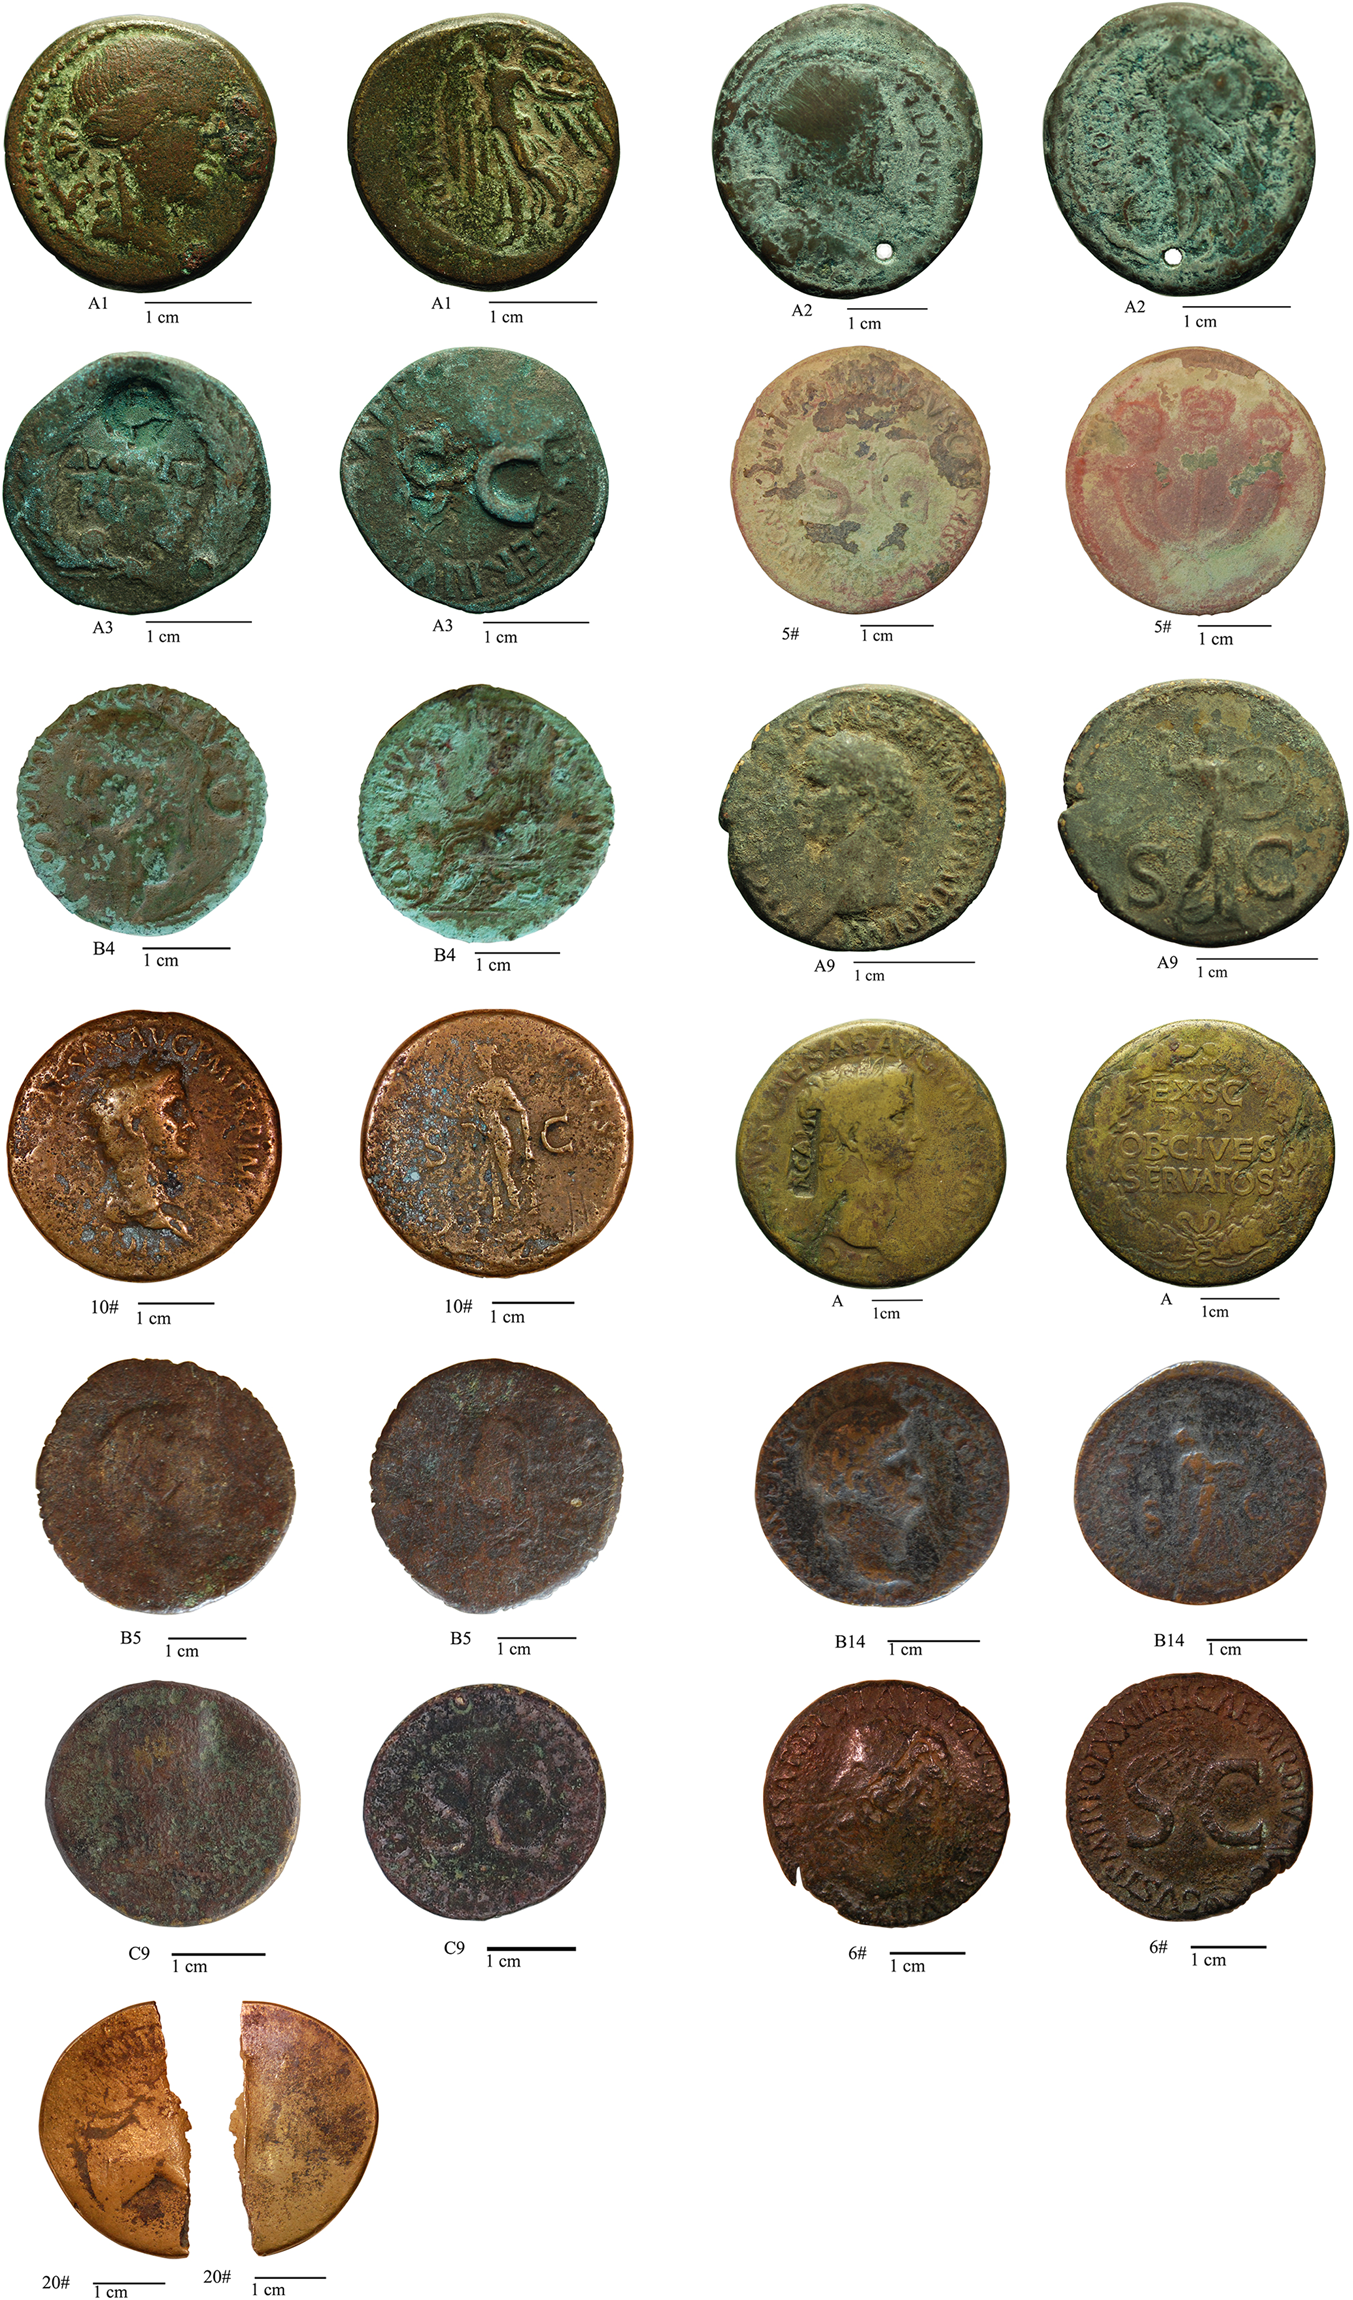 Microstructure and chemical composition of orichalcum coins emitted after the monetary reform of Augustus (23 B.C.) | Scientific Reports